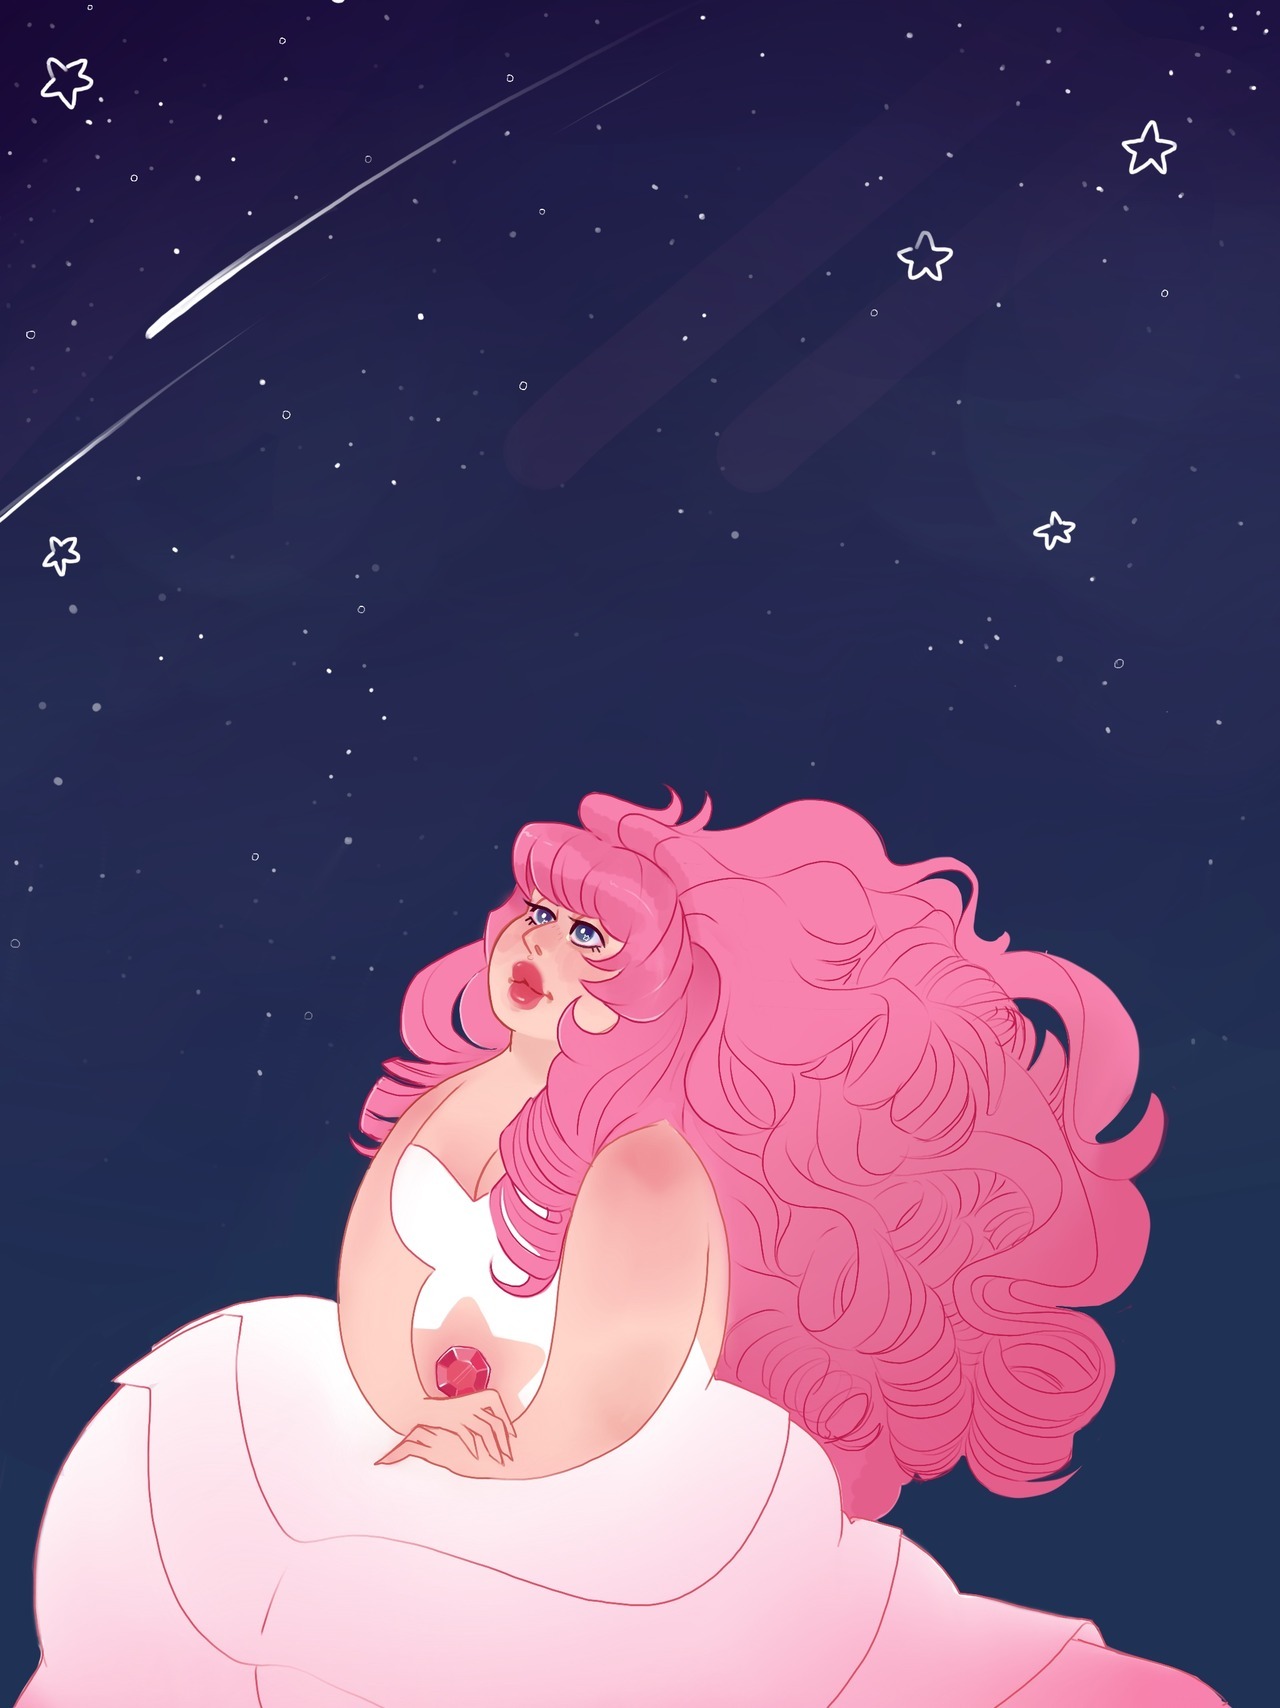 Starry Eyed Galaxy Gazing I finally have drawn a Rose I’m happy with!!